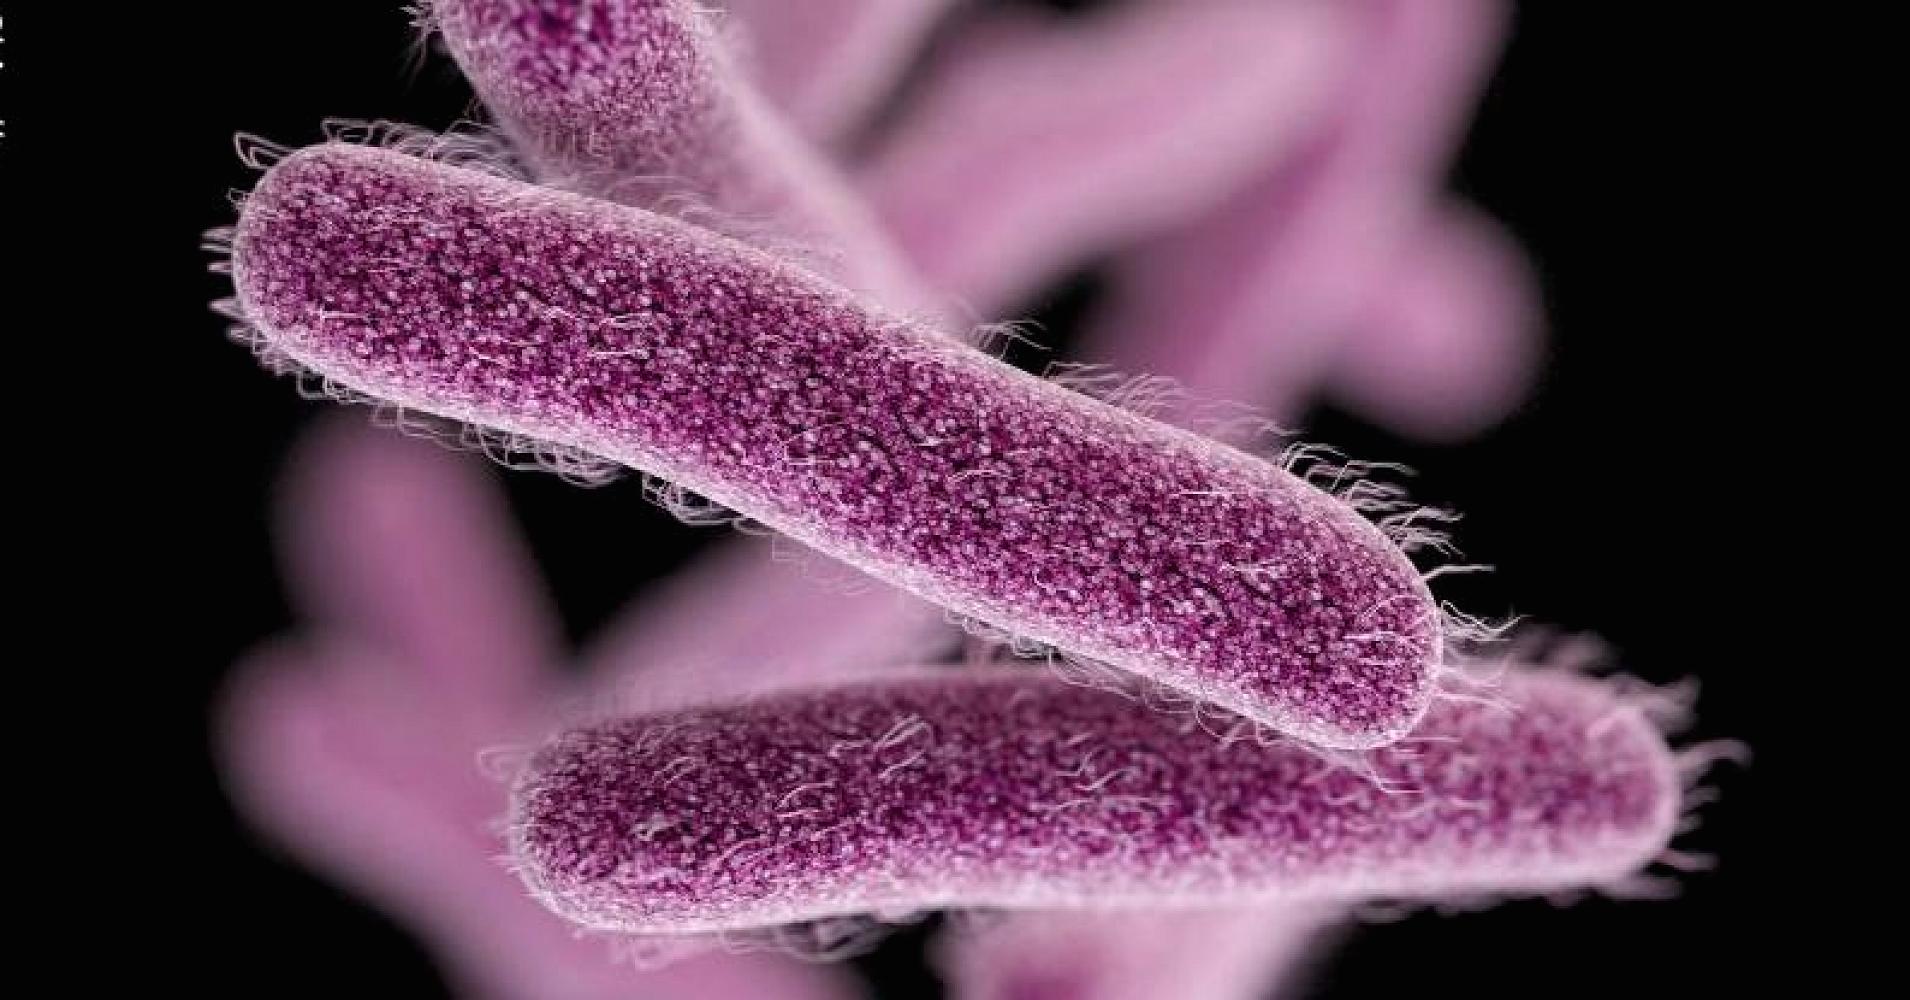 50 more identified with Shigella symptoms in Kozhikode